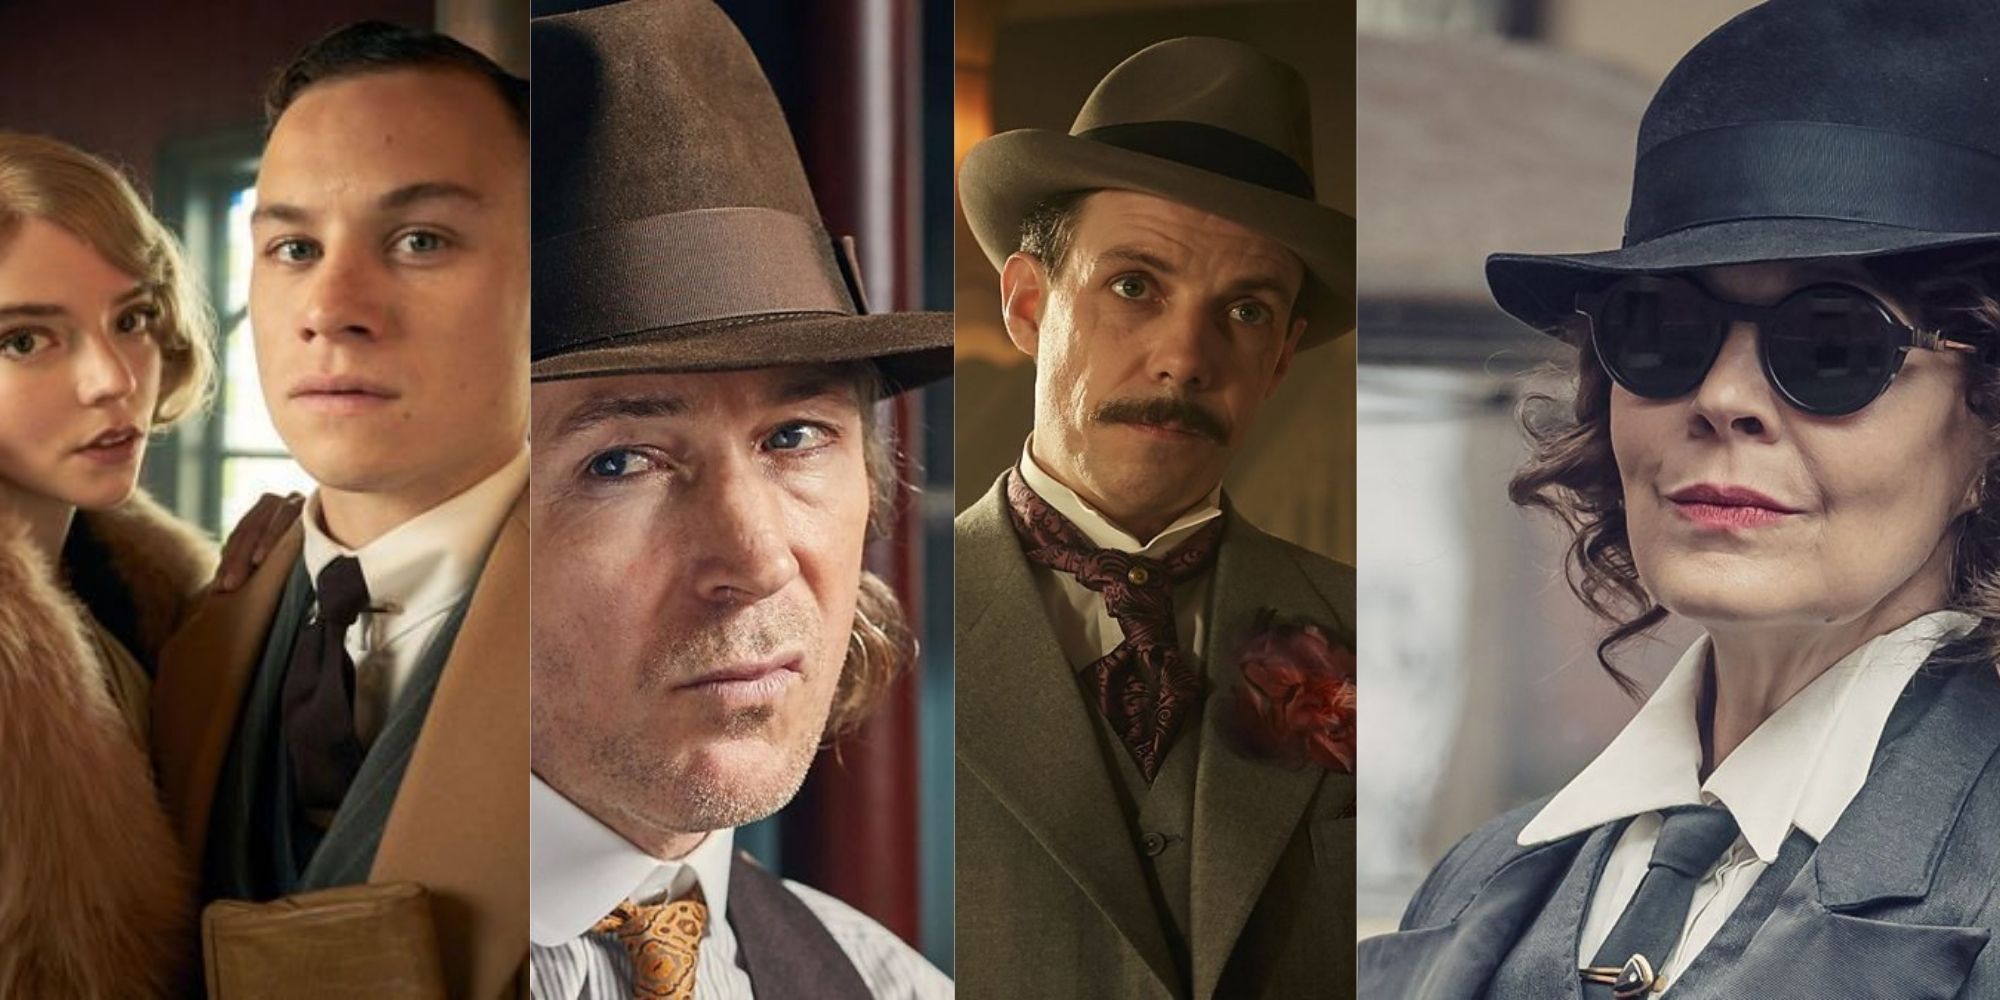 Split image of characters Michael and Gina Gray, Aberama Gold, Darcy Sabini, and Polly Gray from TV show Peaky Blinders.